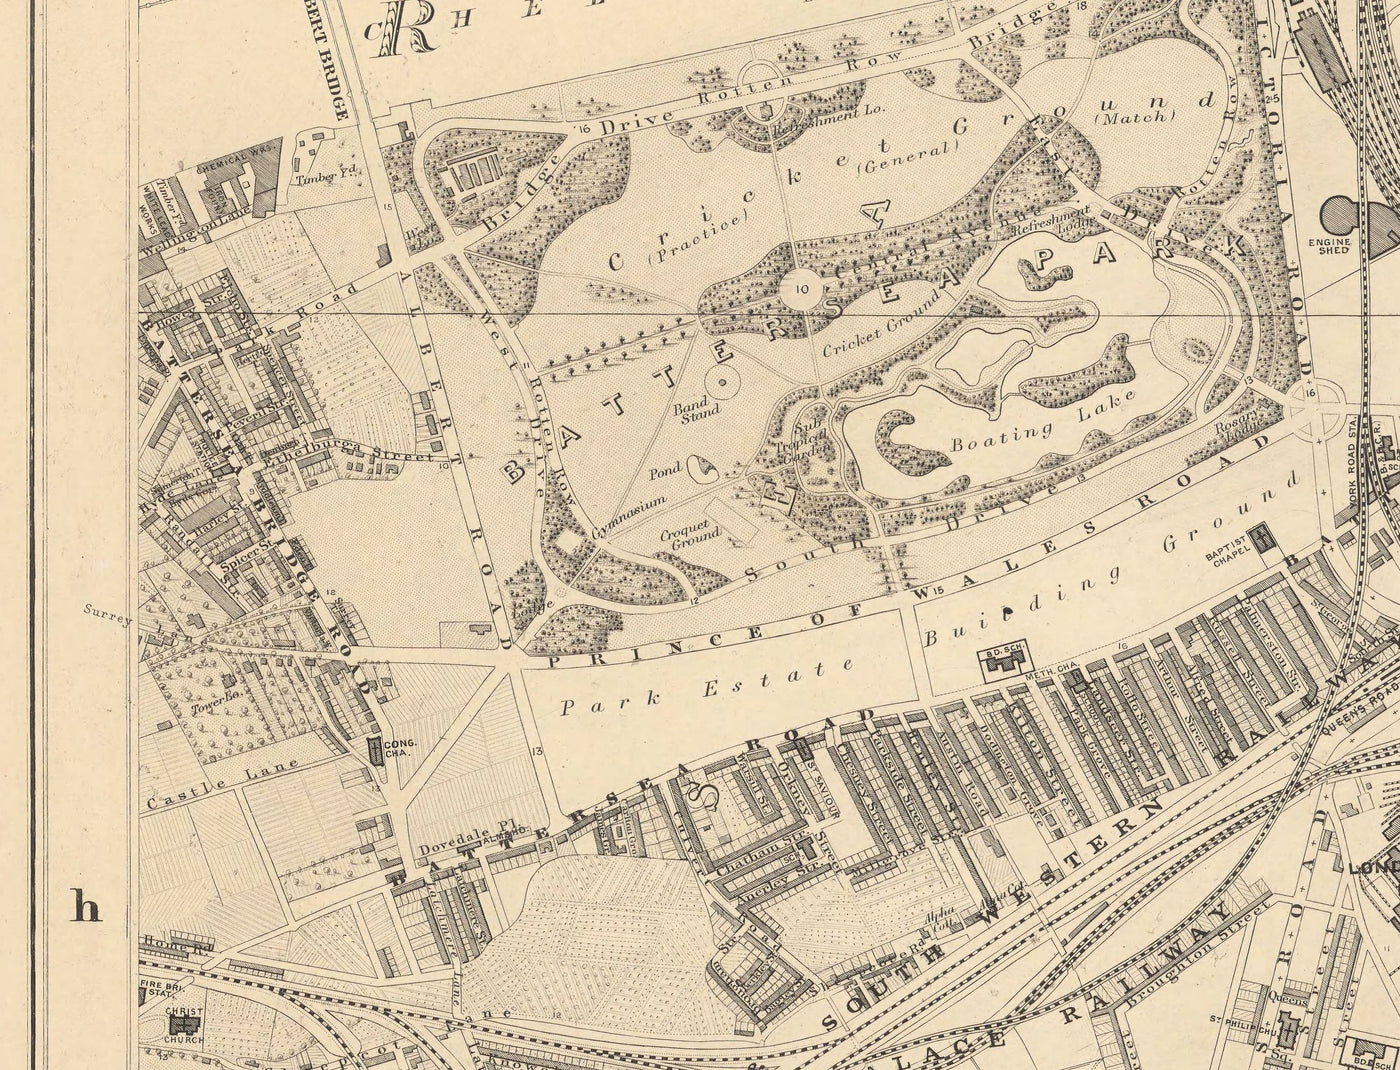 Old Map of South London in 1862 by Edward Stanford - Battersea, Chelsea, Oval, Stockwell, Wandsworth - SW3, SW1, SE11, SW8, SW11, SW9, SW4